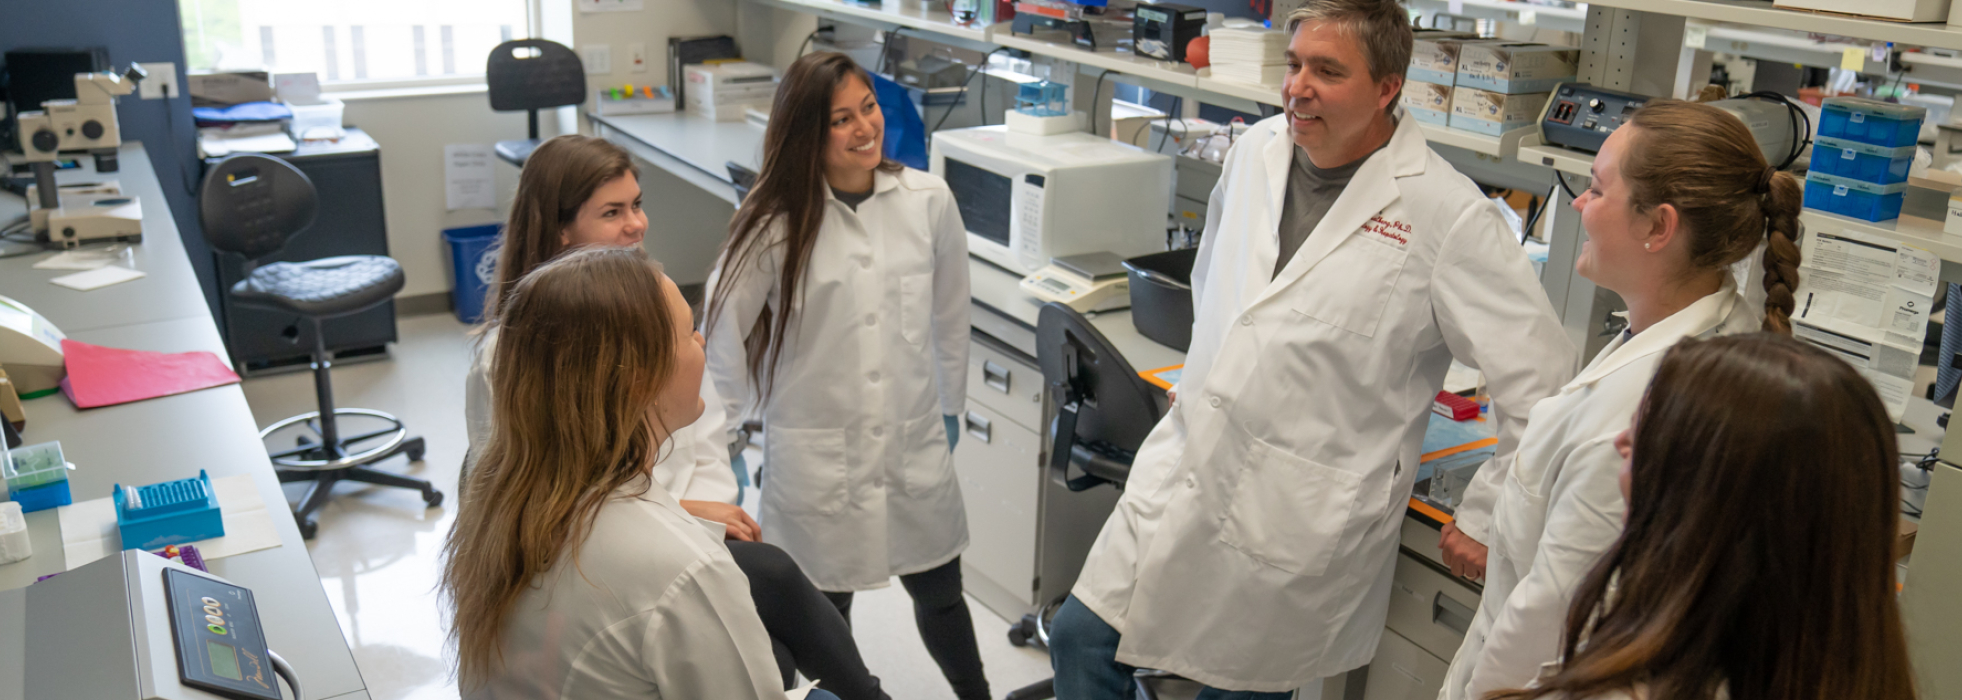 Dr. Richard Halberg in the lab with his research team